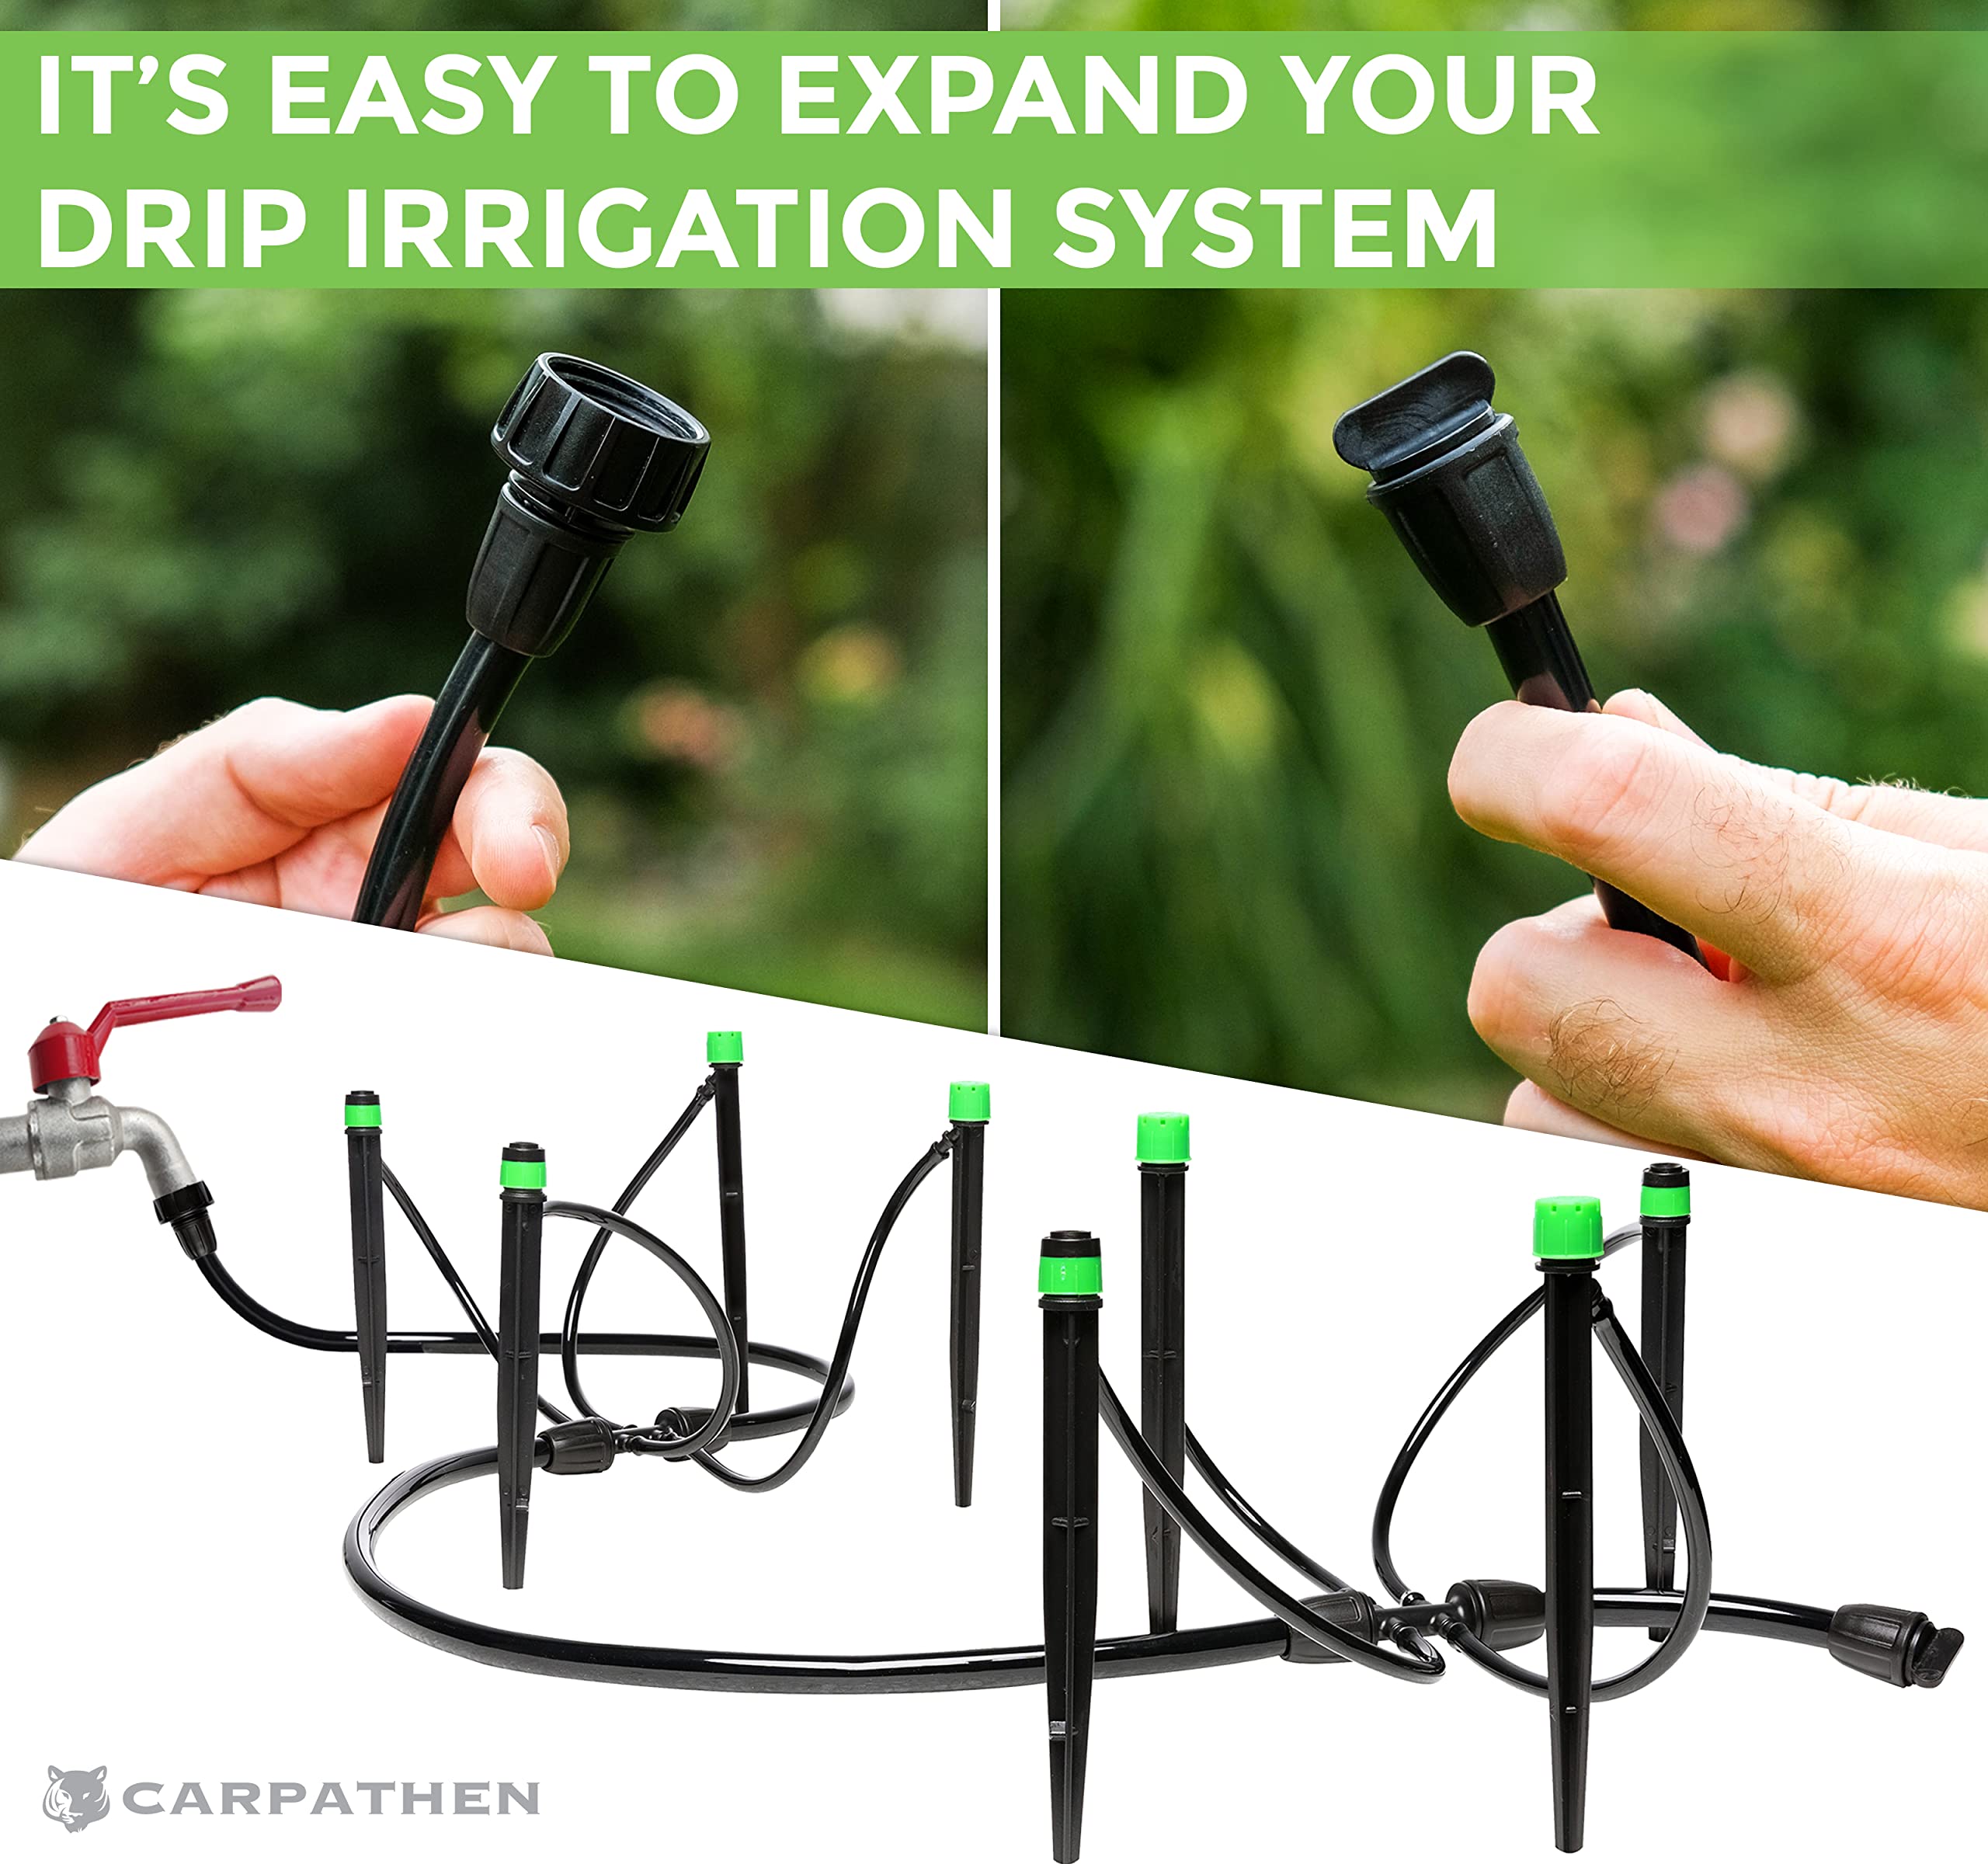 CARPATHEN Drip Irrigation Kit - Adjustable Premium Garden Watering System for Raised Garden Bed, Yard, Lawn + 6 pcs Drip Irrigation Parts - 3 x Female Thread Adapter + 3 End Plugs for 5/16 Mainline